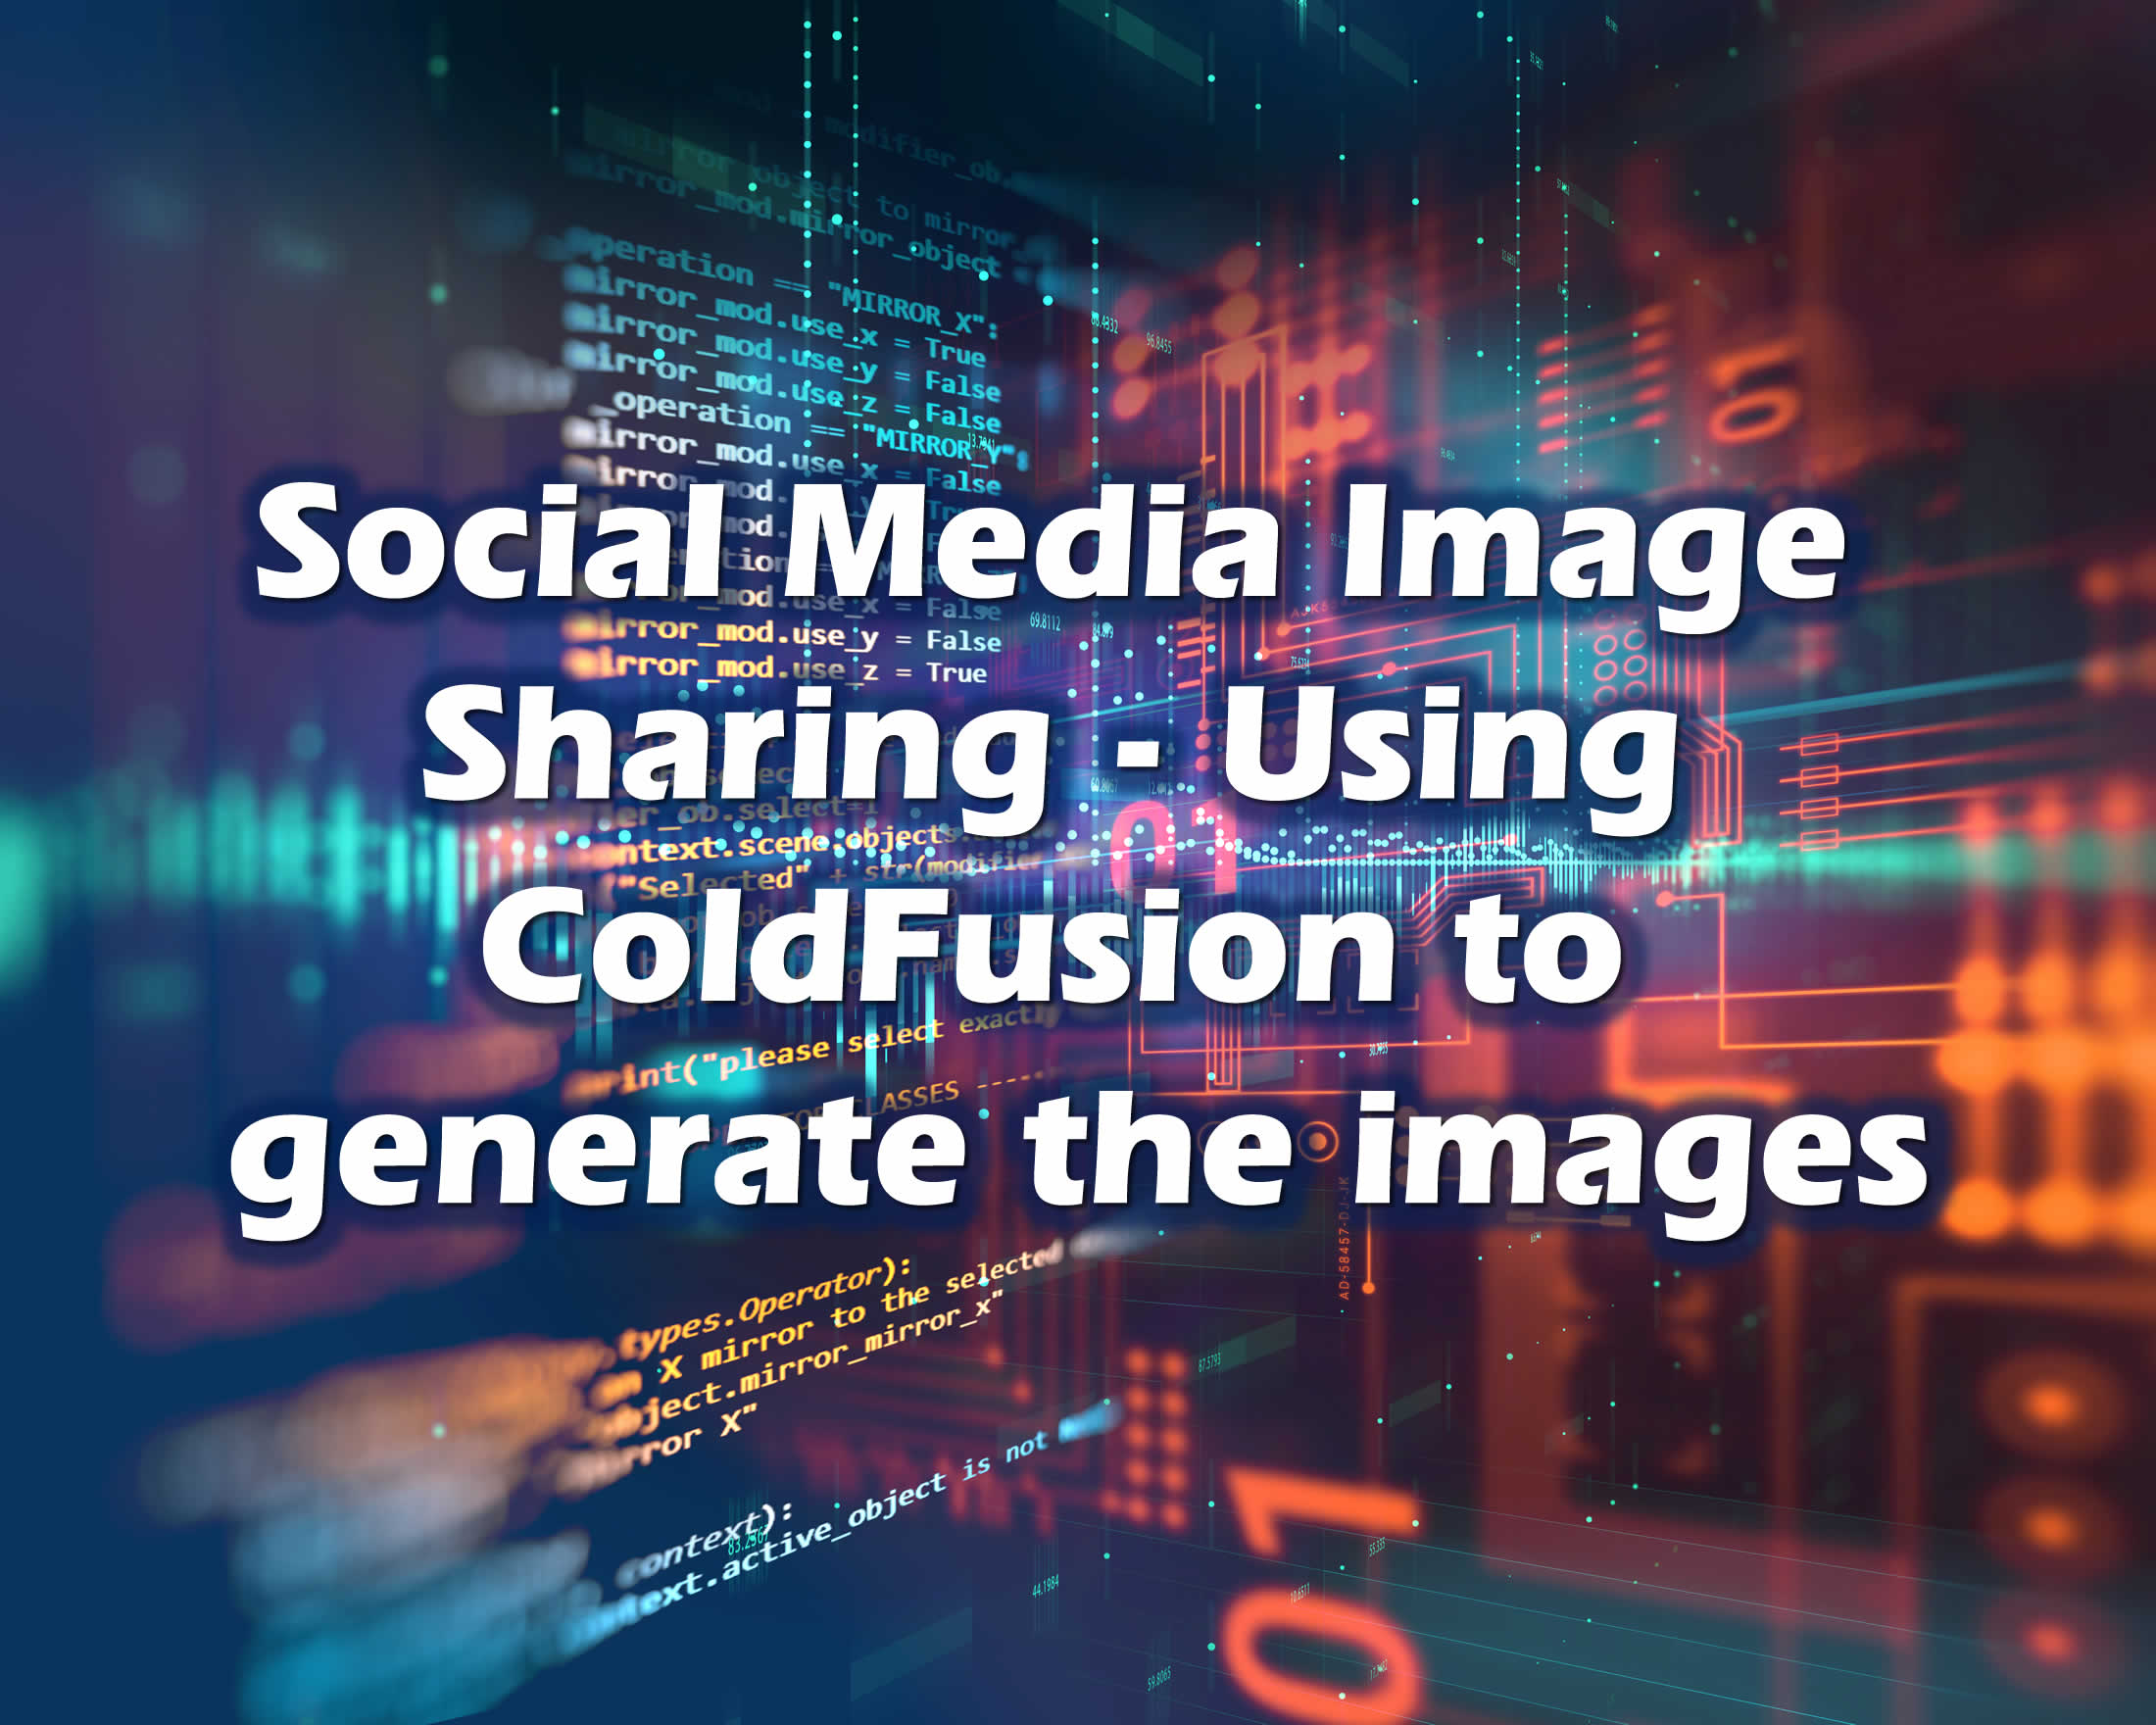 How to make the perfect social media sharing image - part 3 Get the code...